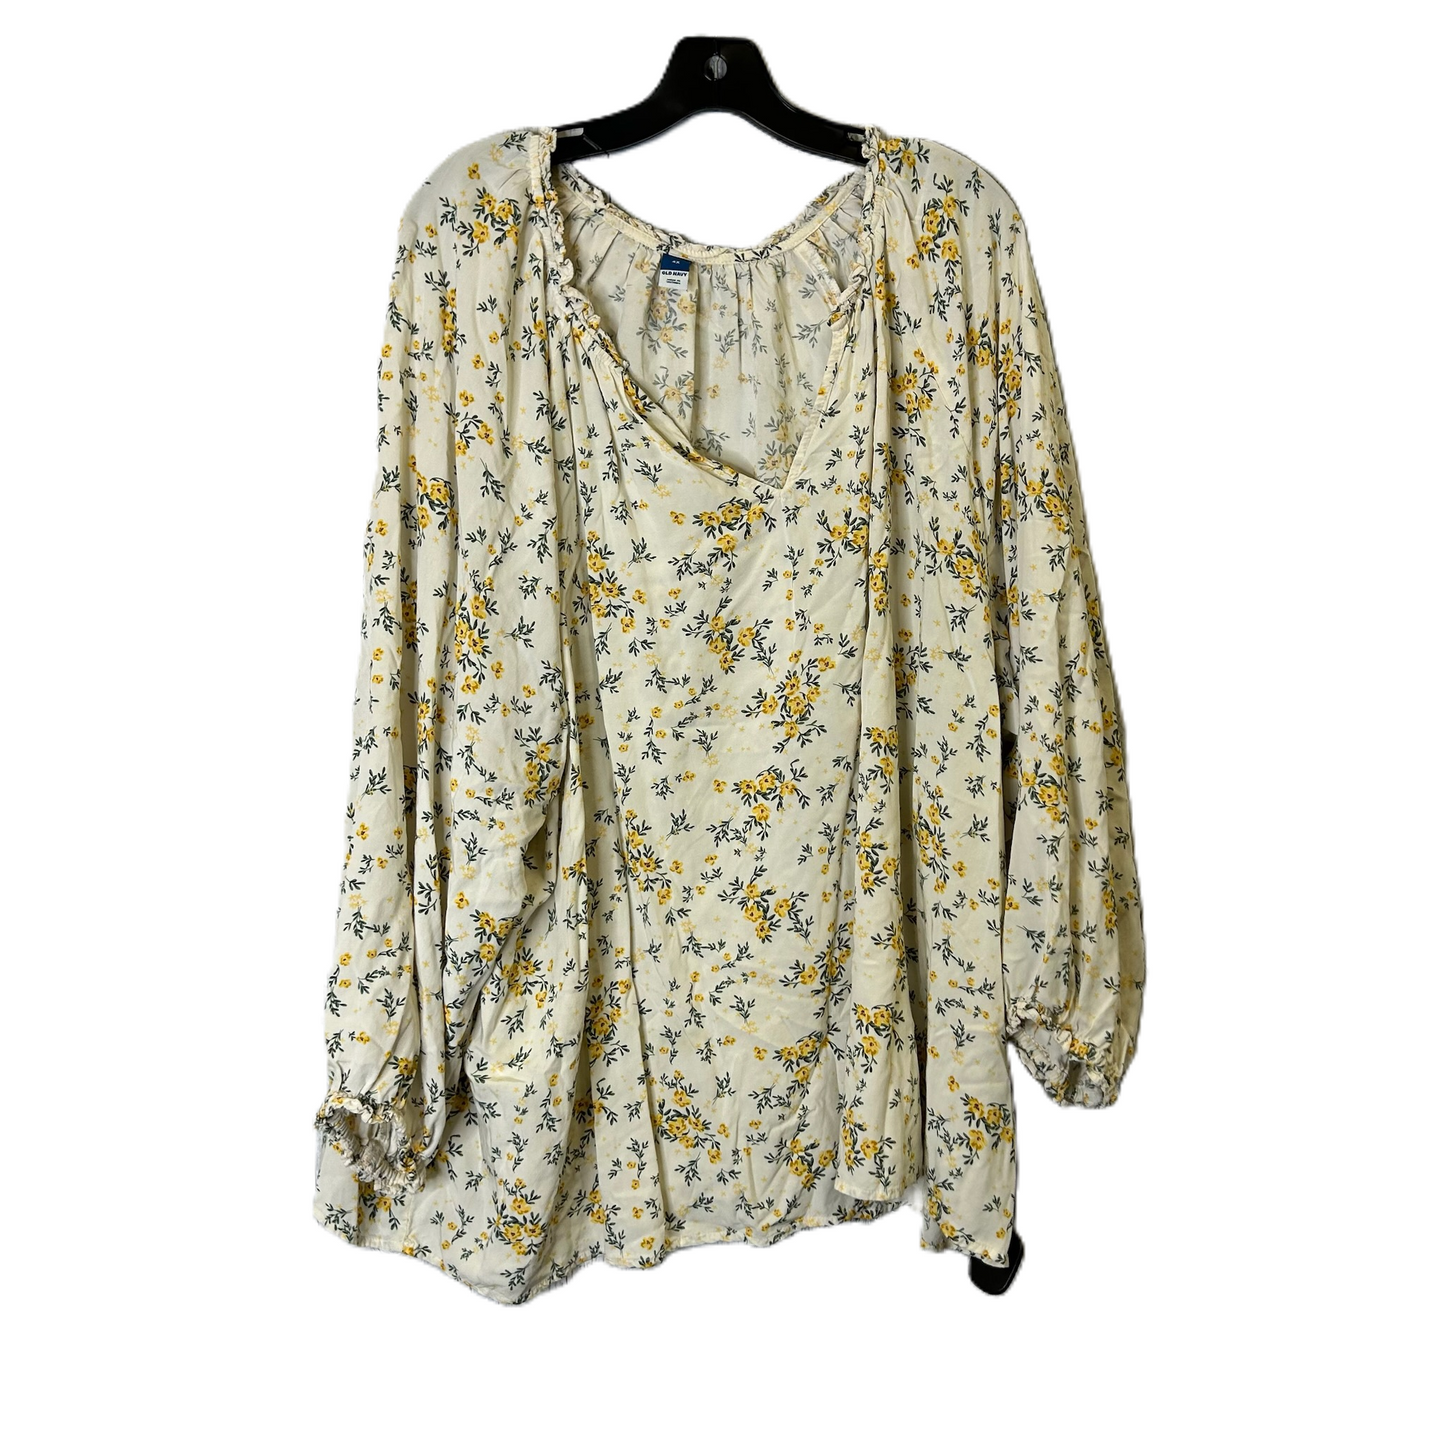 Cream Top Long Sleeve By Old Navy, Size: 4x